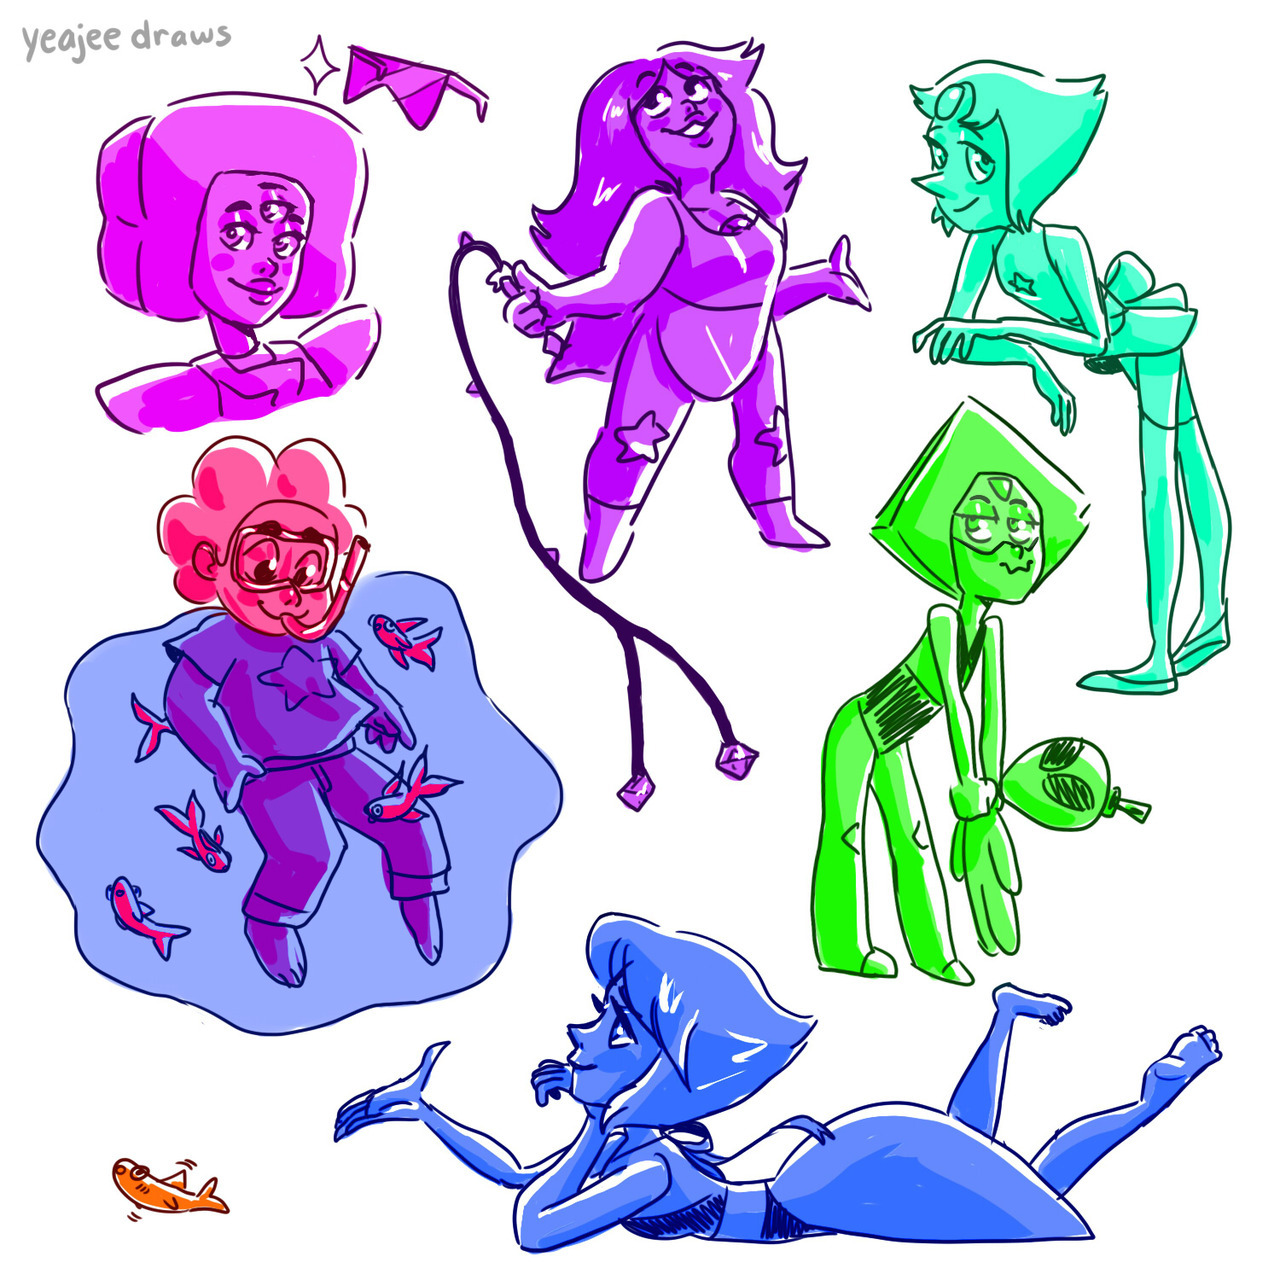 Quick doodles of the Crystal Gems!